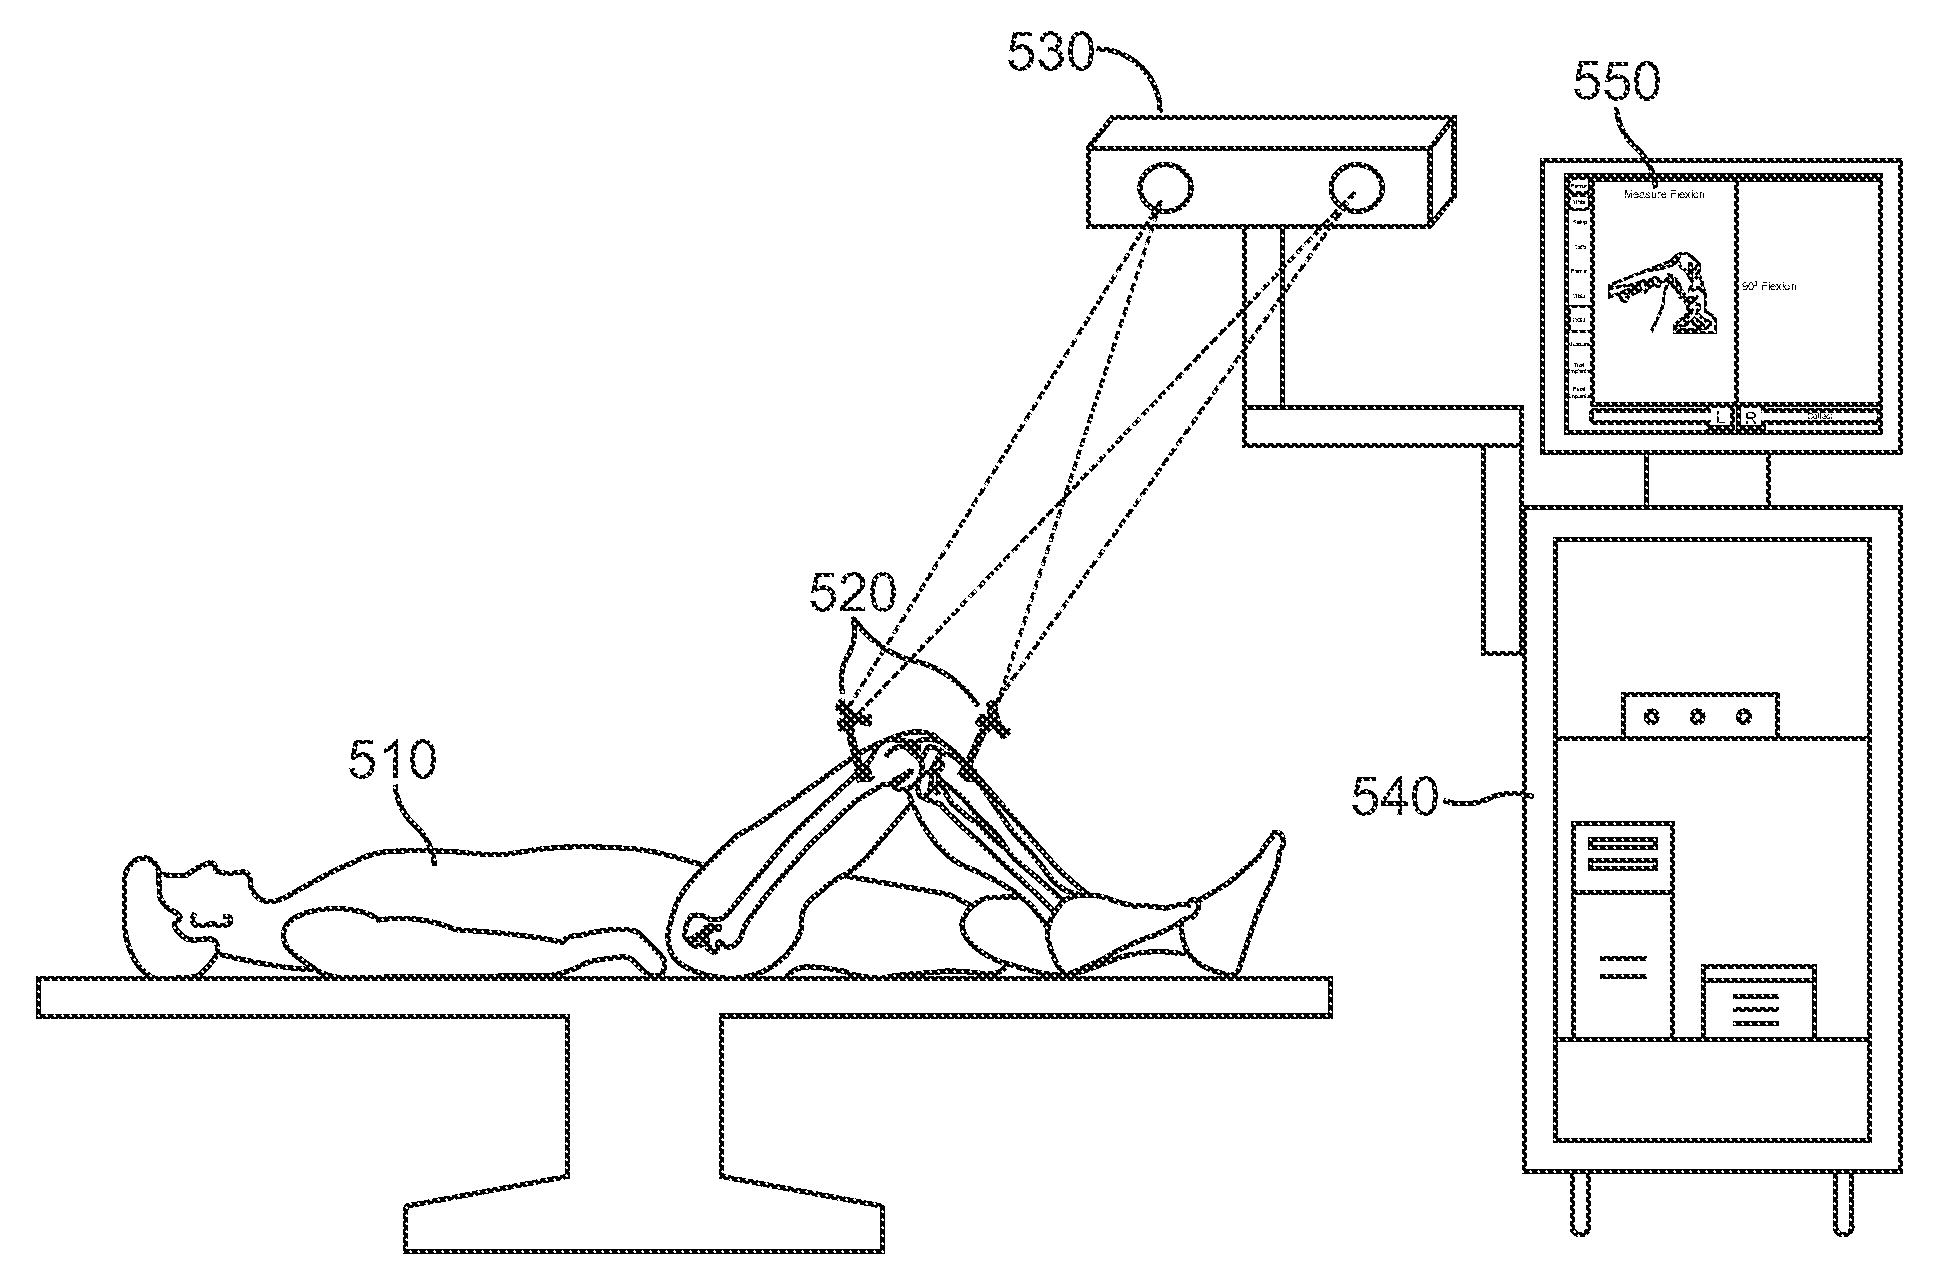 Method for improved rotational alignment in joint arthroplasty